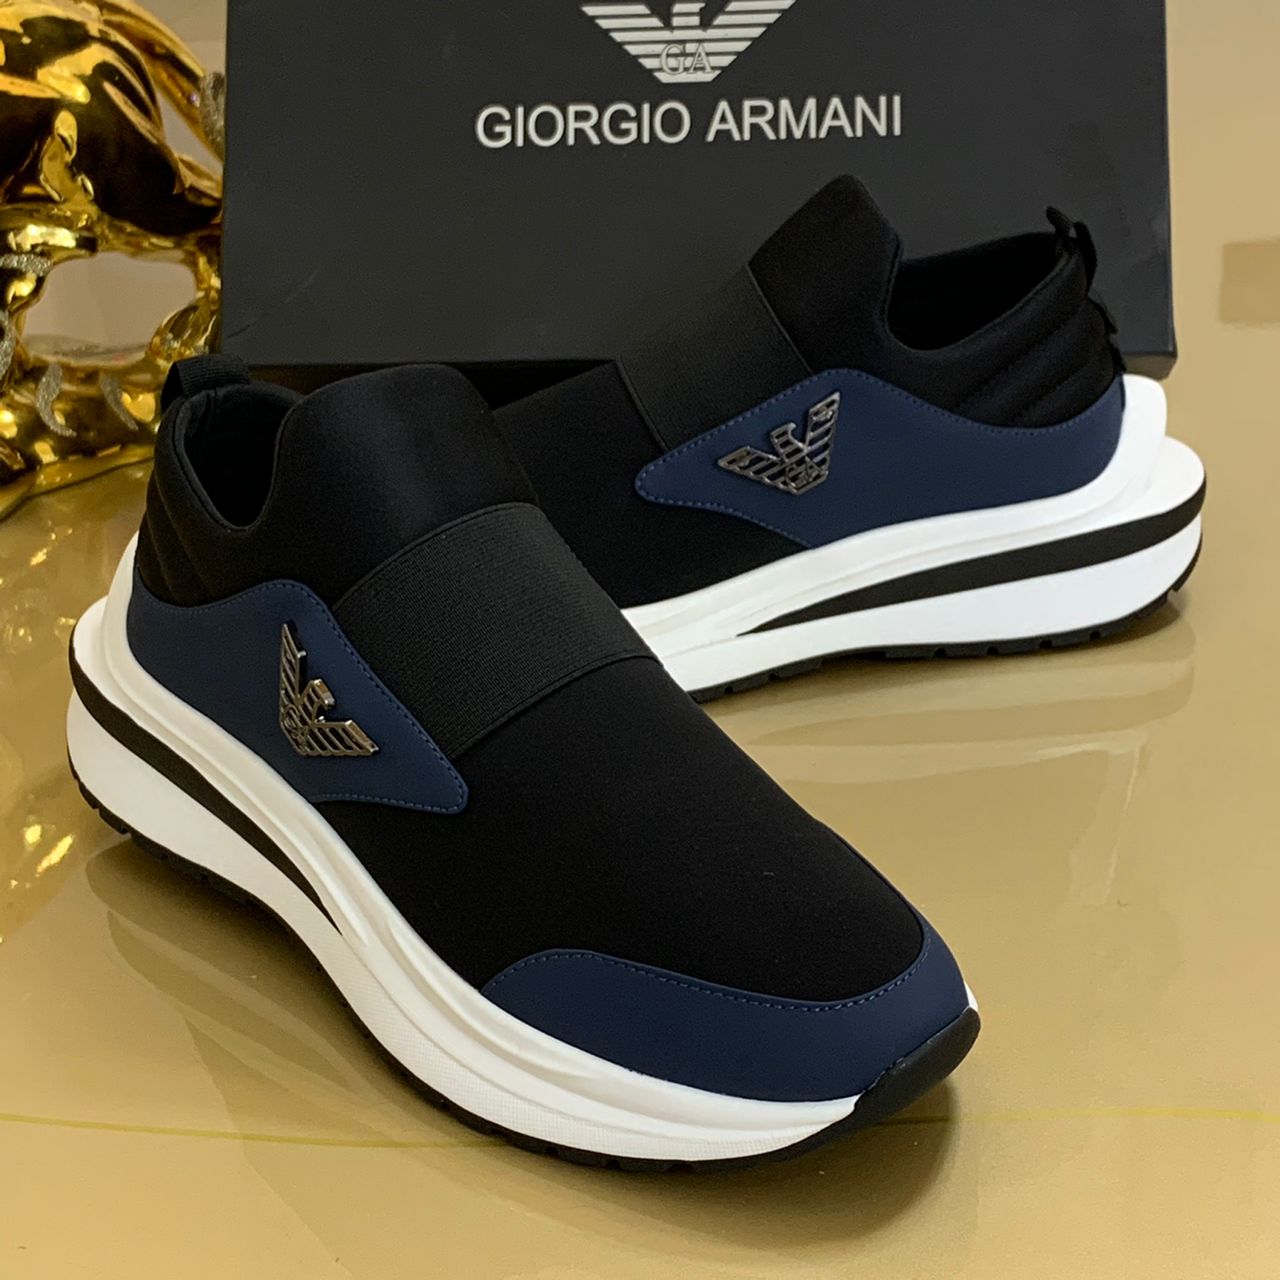 RADIANT FABRIC SLIP ON FASHION TRAINER SNEAKERS for CartRollers Marketplace For Shopping Online, Fashion, Electronics, Phones, Computers and Buy Men Shoe, Home Appliances, Kitchen-wares, Groceries Accessories, ankara, Aso-Ebi, Beads, Boys Casual Wears, Children Children's Wears ,Corporate Shoes, Cosmetics Dress ,Dresses Fashion, Girls' Dresses ,Girls' Wears, Hair Care ,Jewelries ,Jewelry Kids, Kids' Fashion Ladies ,Wears Lapel Pins, Loafers Shoe Men ,Men's Caftan, Men's Casual Shoes, Men's Fashion, Men's Shoes, Men's Wears, Moccasin Shoe, Natural Hair, In Lagos Nigeria